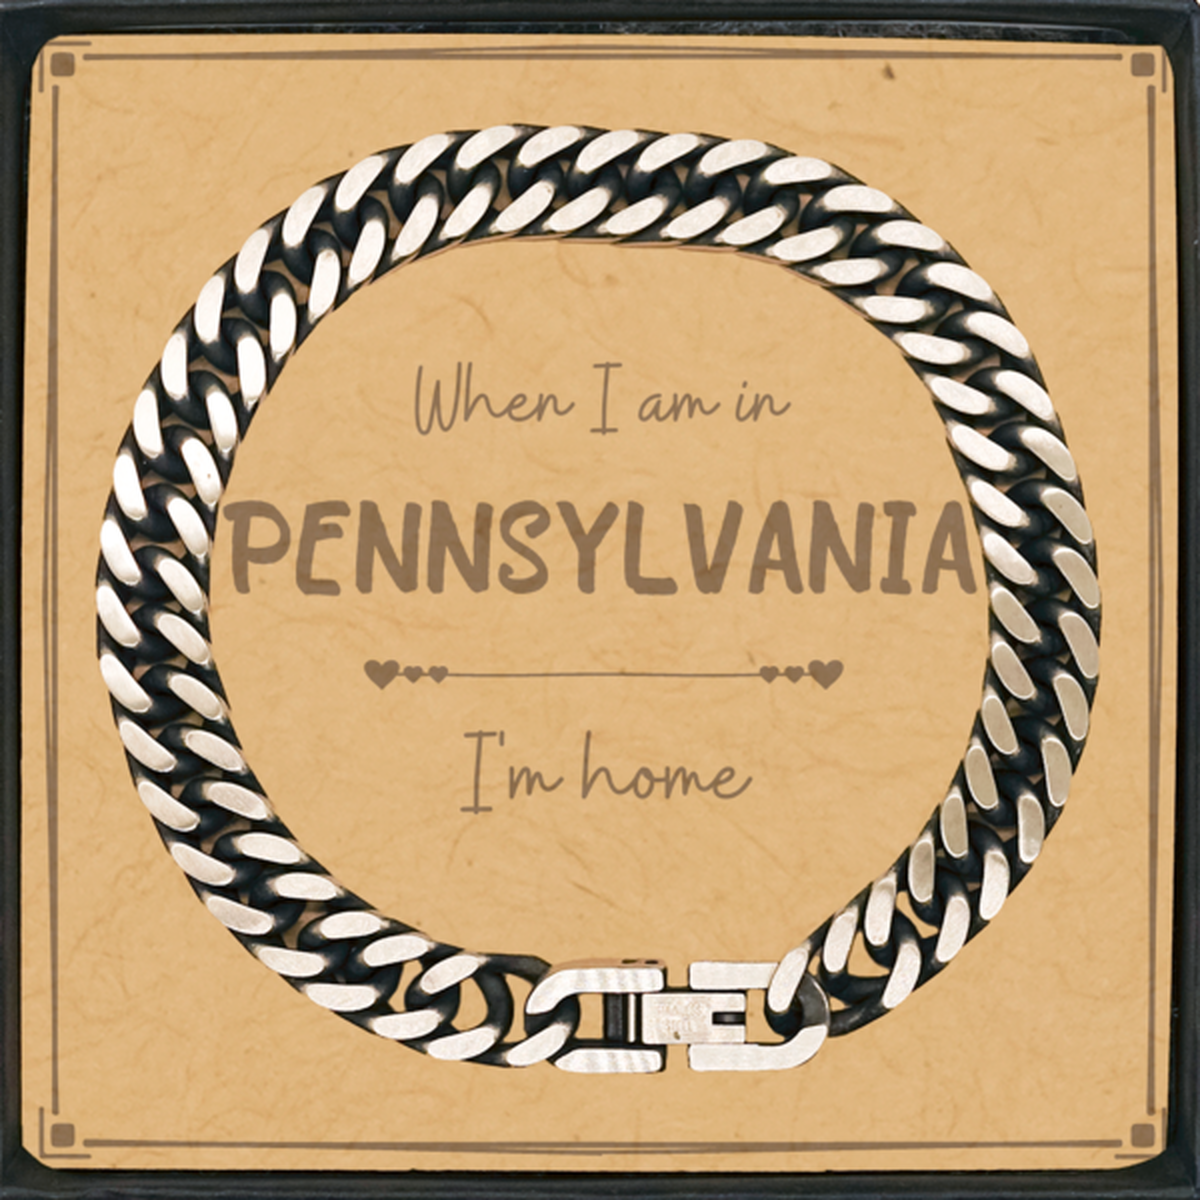 When I am in Pennsylvania I'm home Cuban Link Chain Bracelet, Message Card Gifts For Pennsylvania, State Pennsylvania Birthday Gifts for Friends Coworker